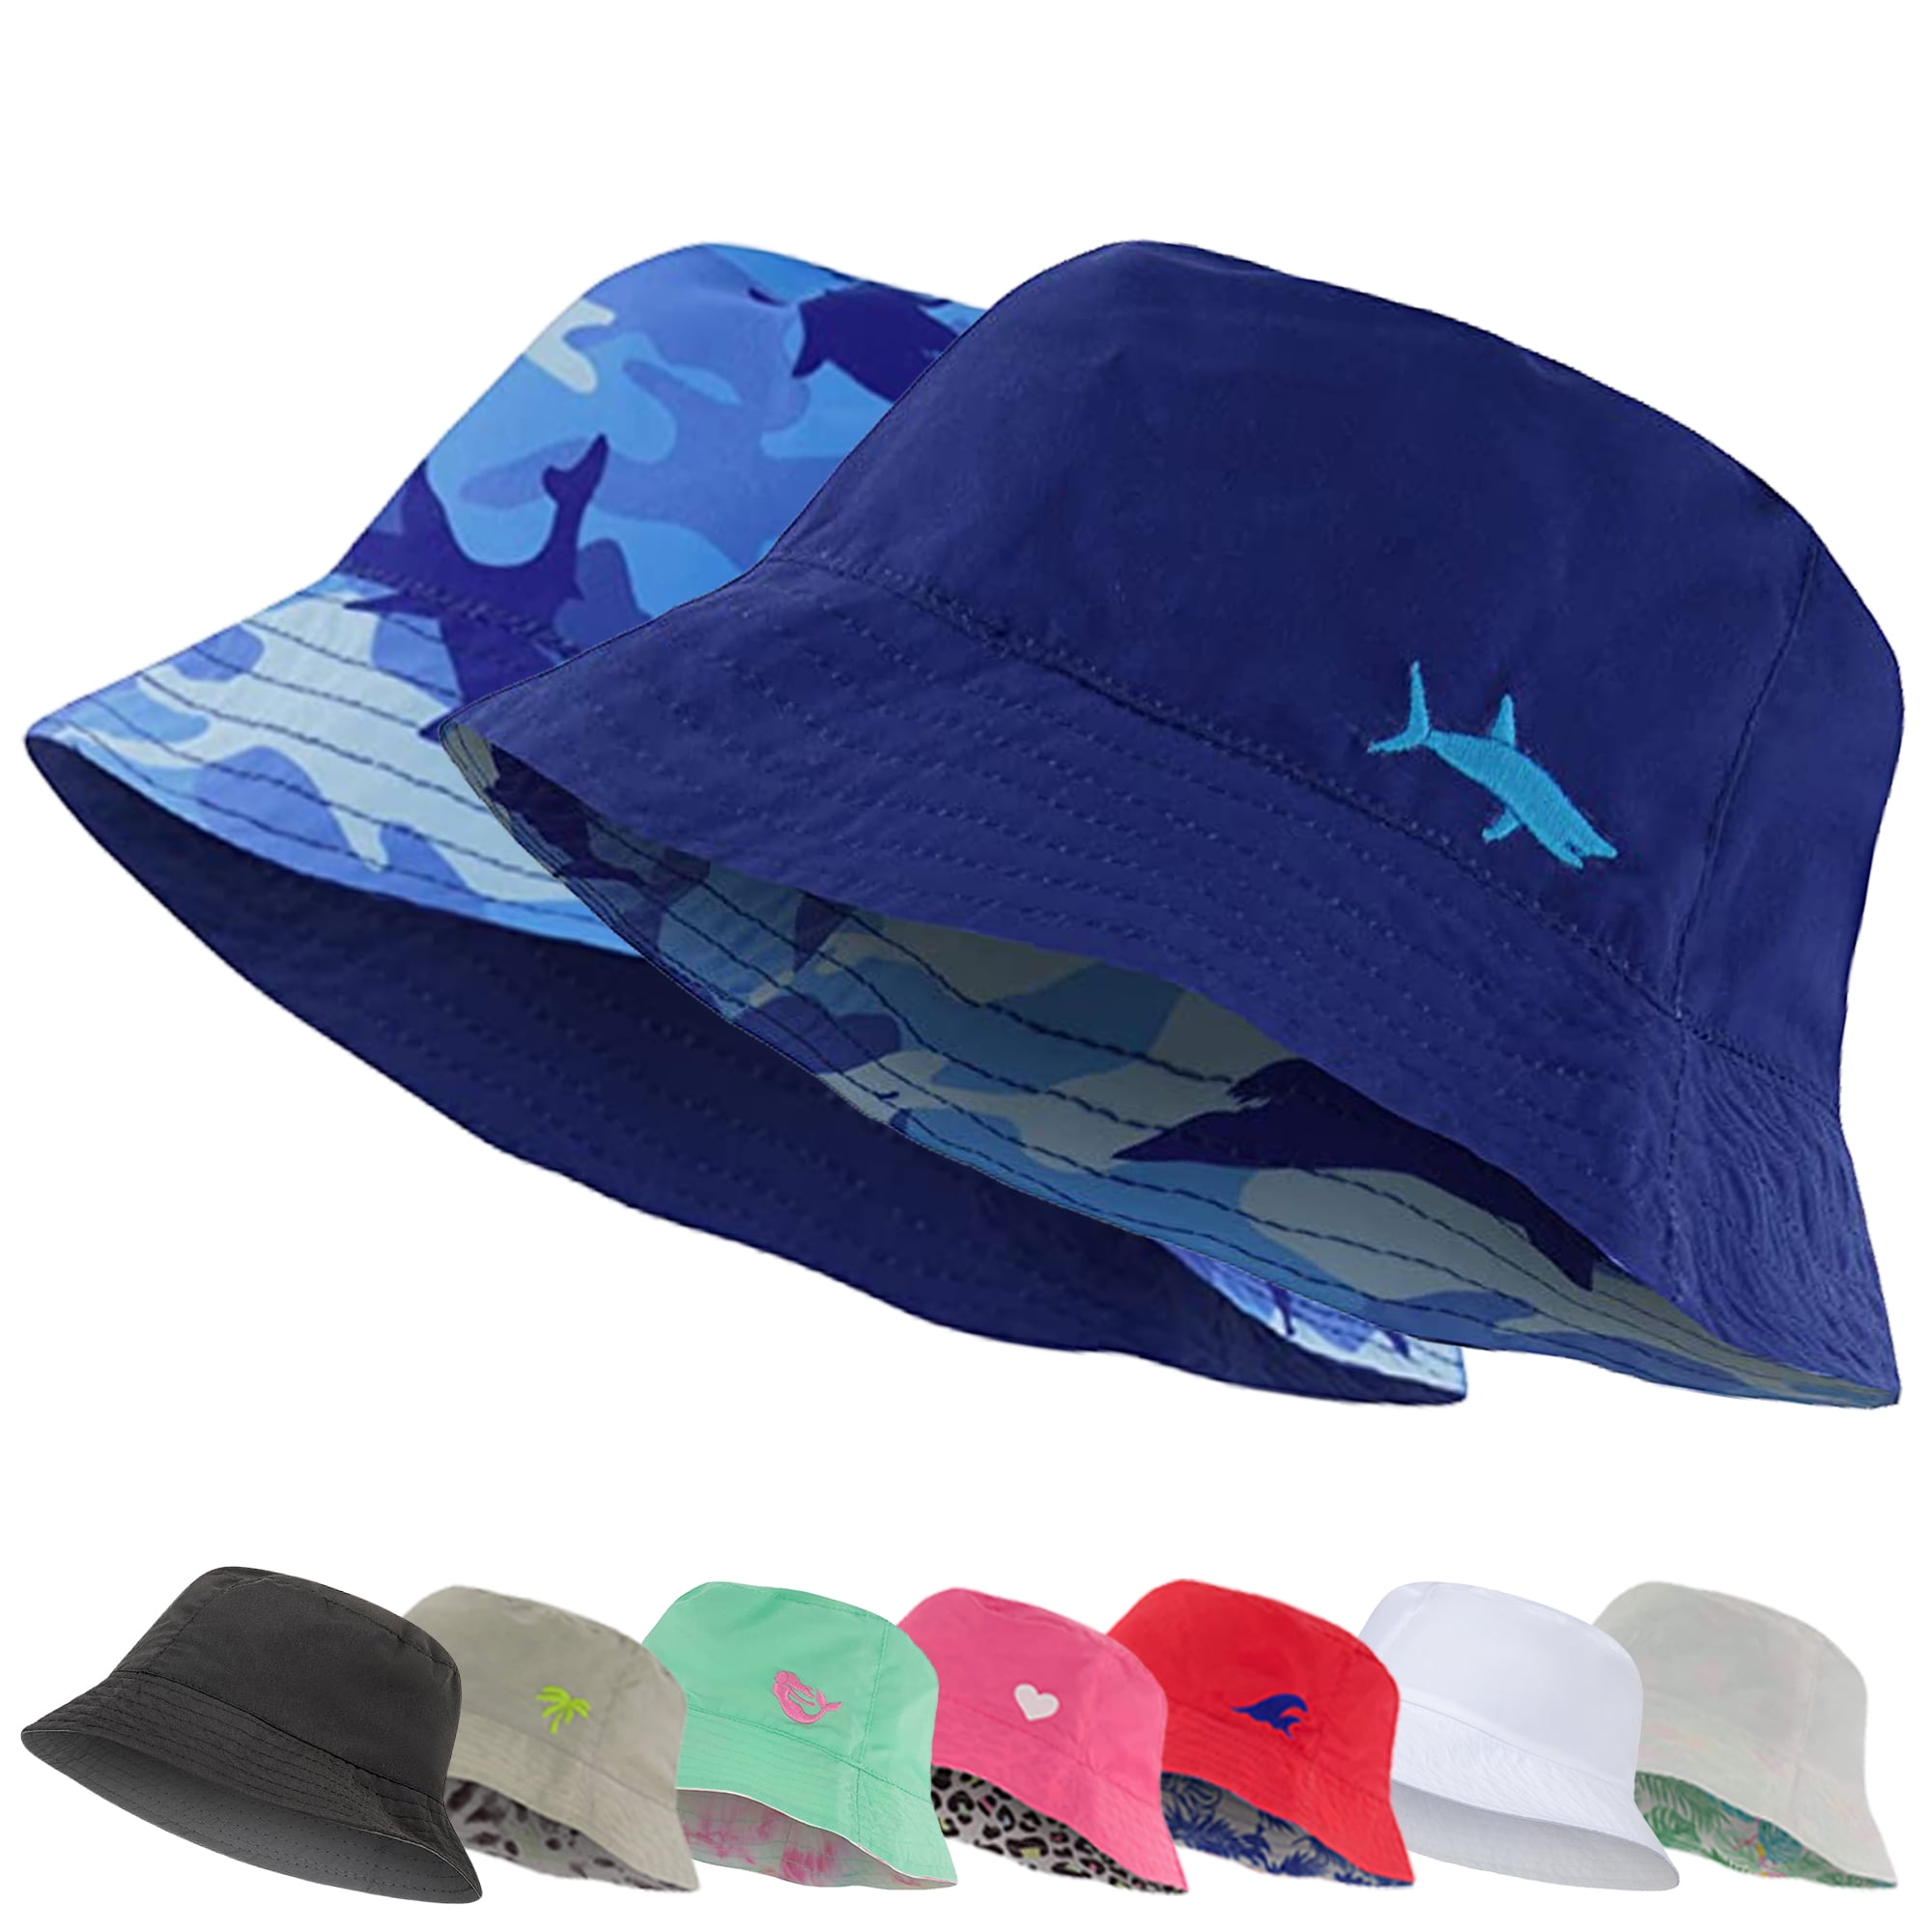 Addie & Tate Unisex Blue Reversible Bucket Hat for Kids 3-6 Years Old ...